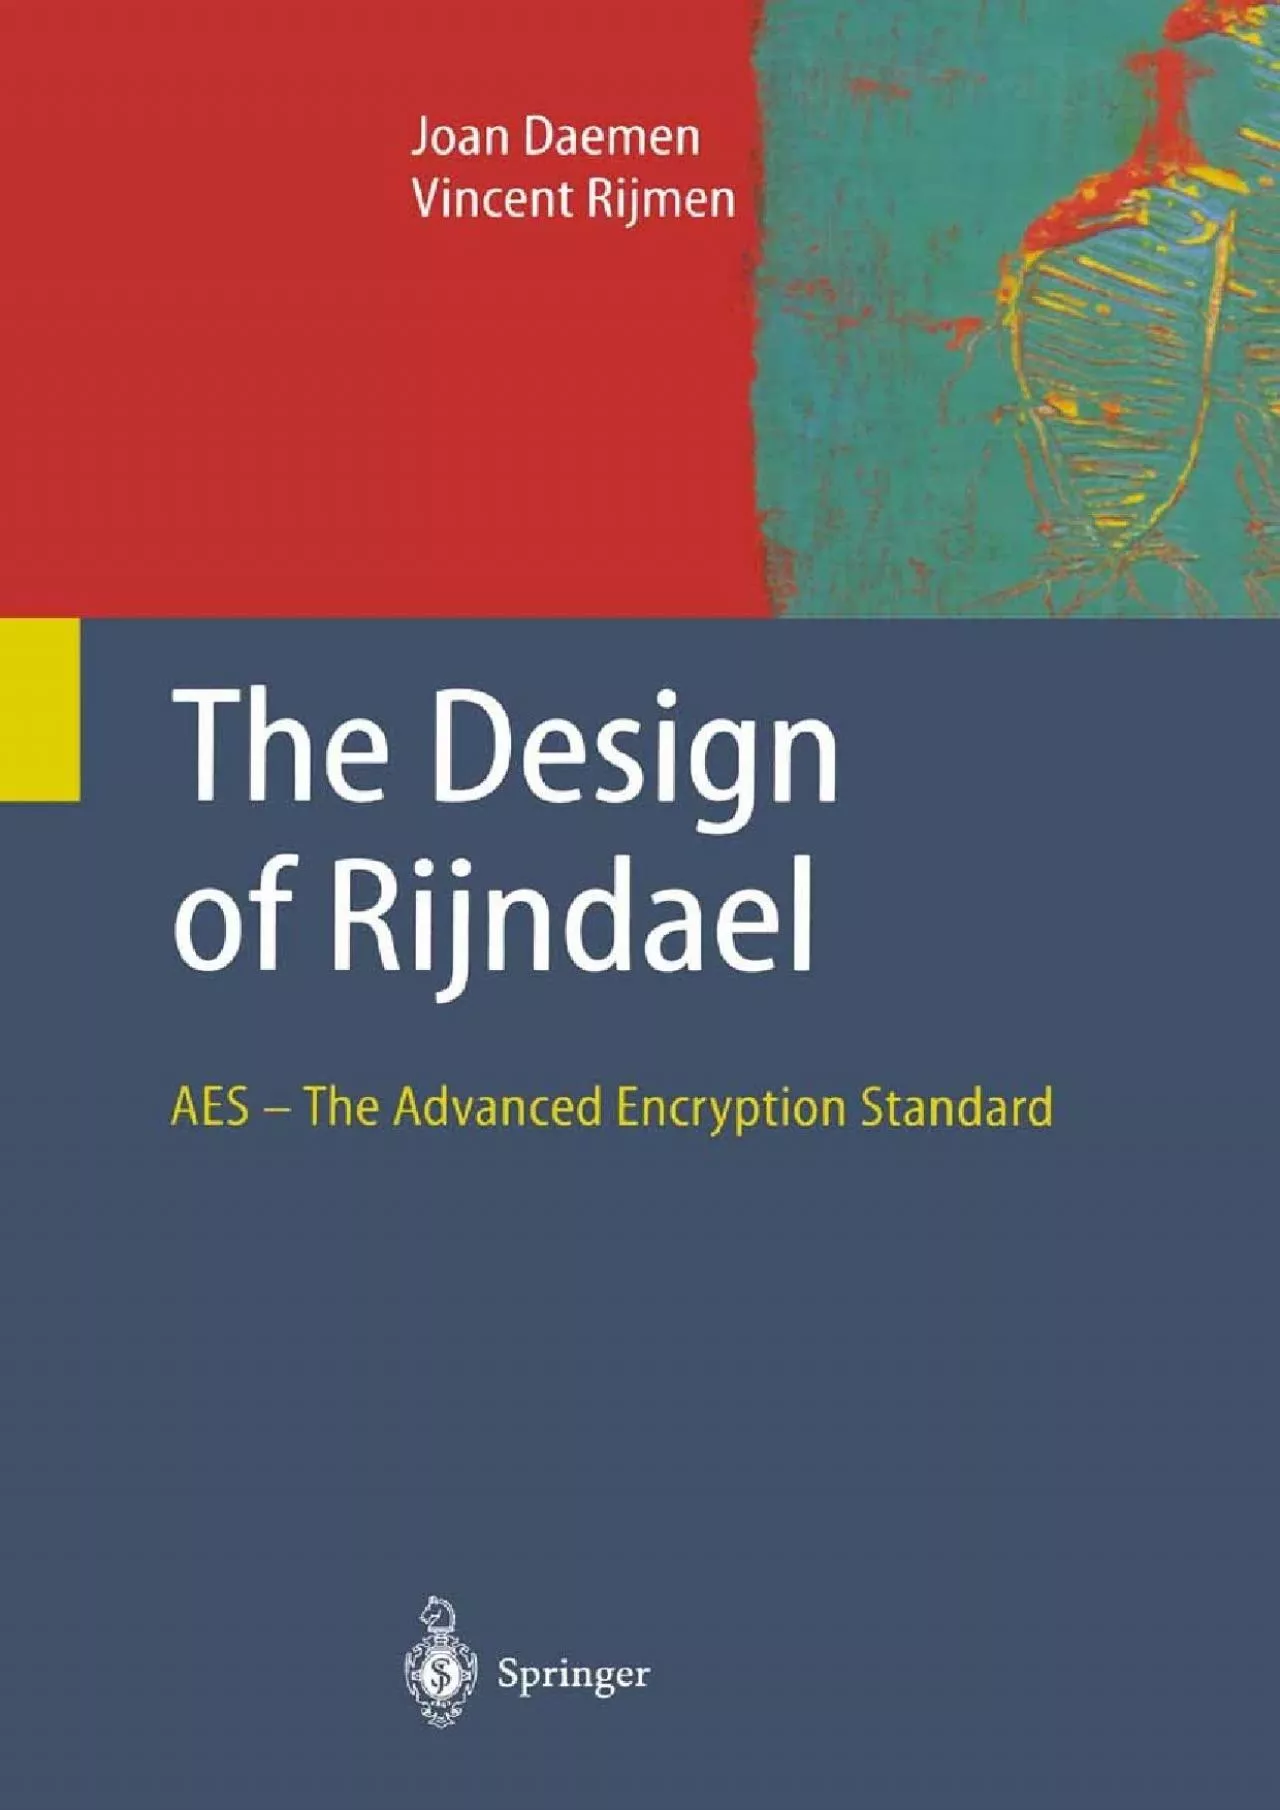 (BOOK)-The Design of Rijndael: AES - The Advanced Encryption Standard (Information Security